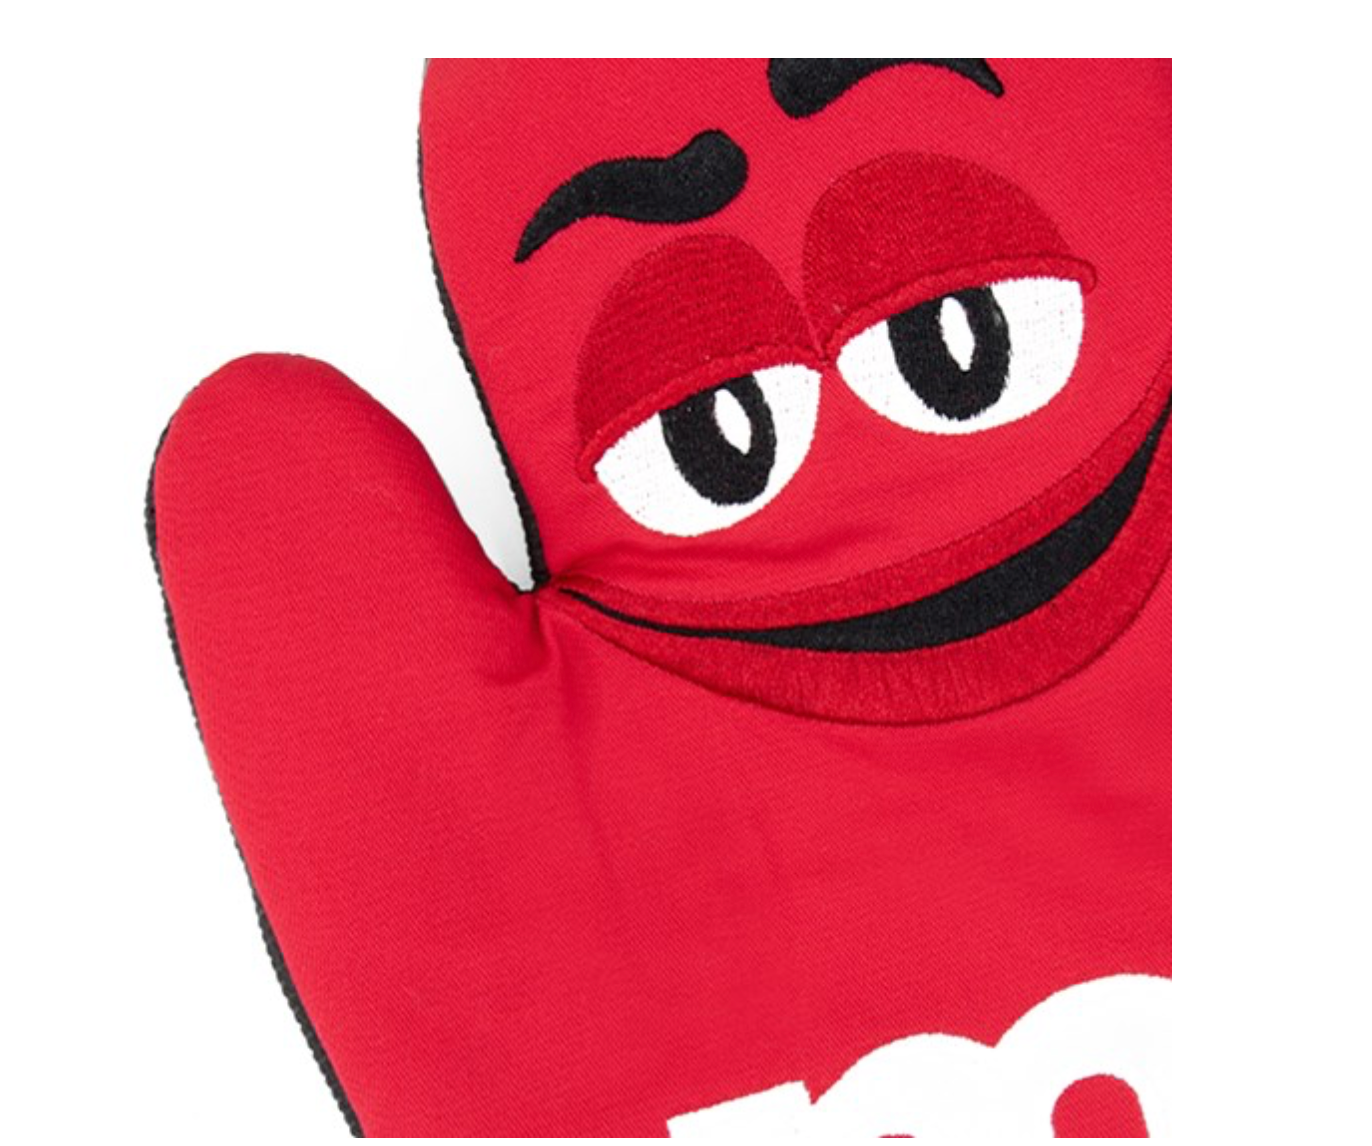 M&M's World Red Character Oven Mitt New with Tag